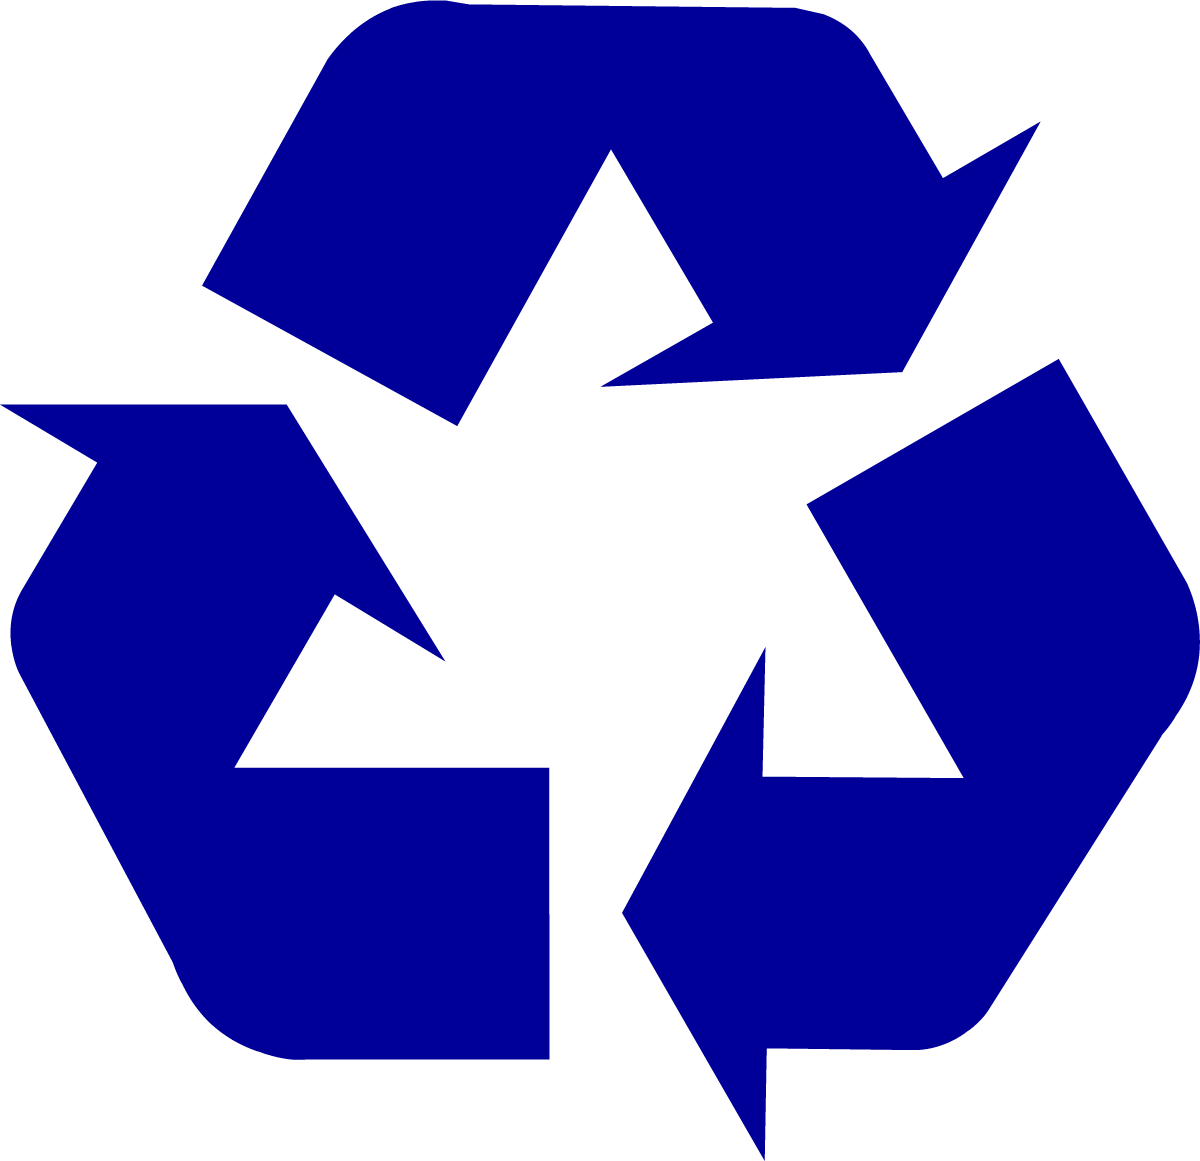 Recycling symbol download.